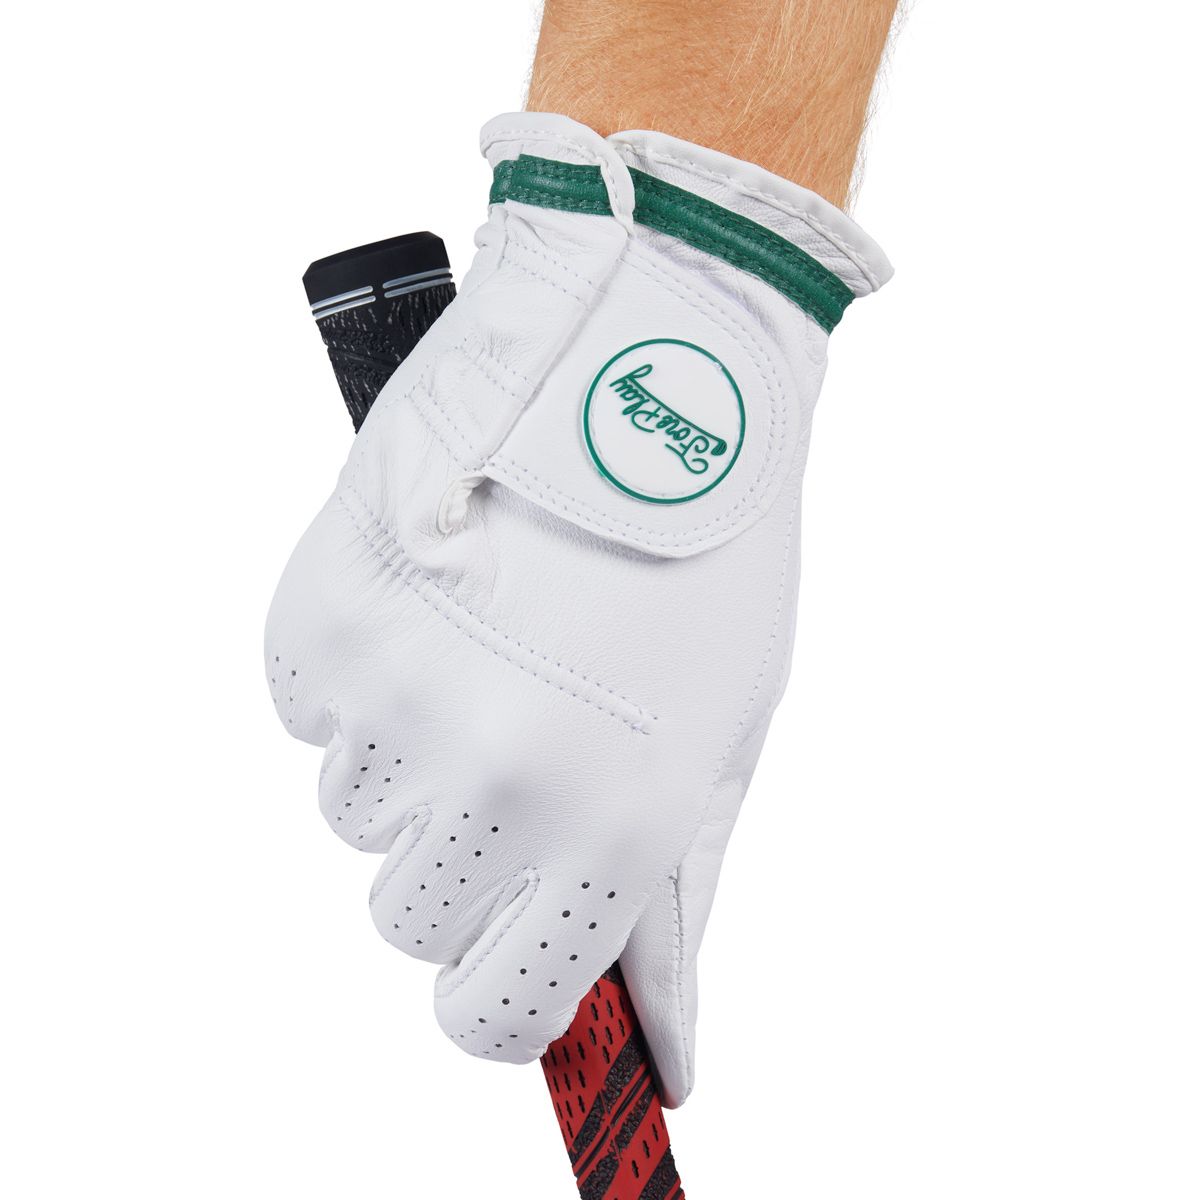 Fore Play Golf Glove-Golf Accessories-Fore Play-Barstool Sports